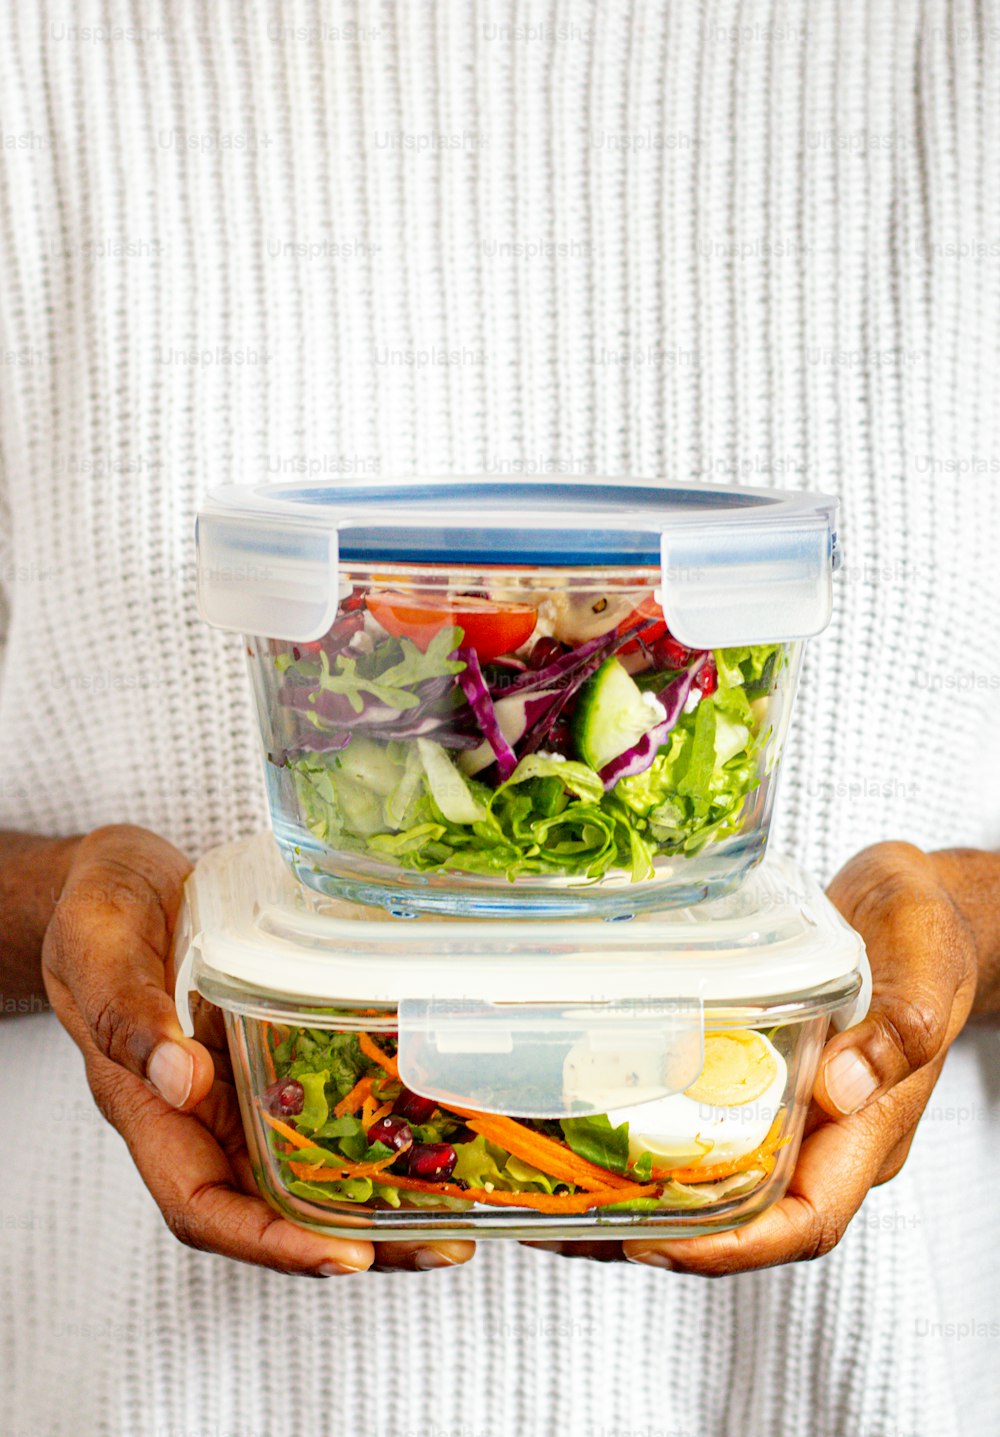 a person holding a container with a salad in it